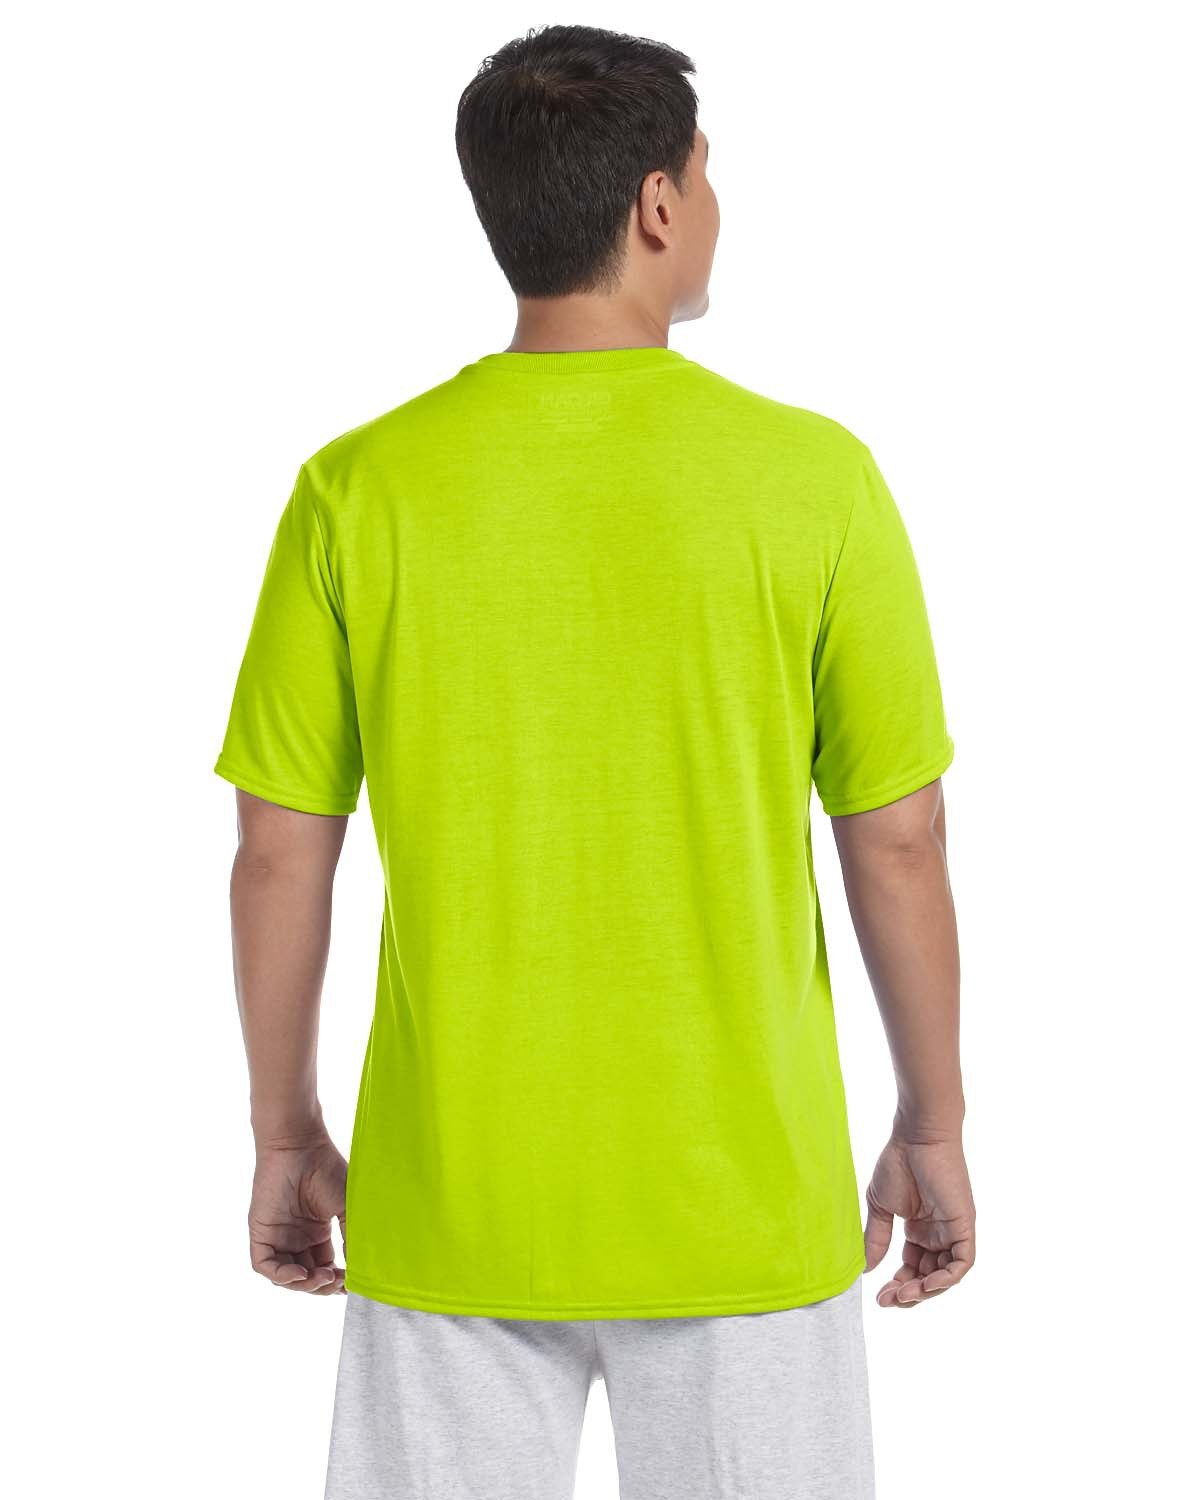 Safety green performance t-shirt back side